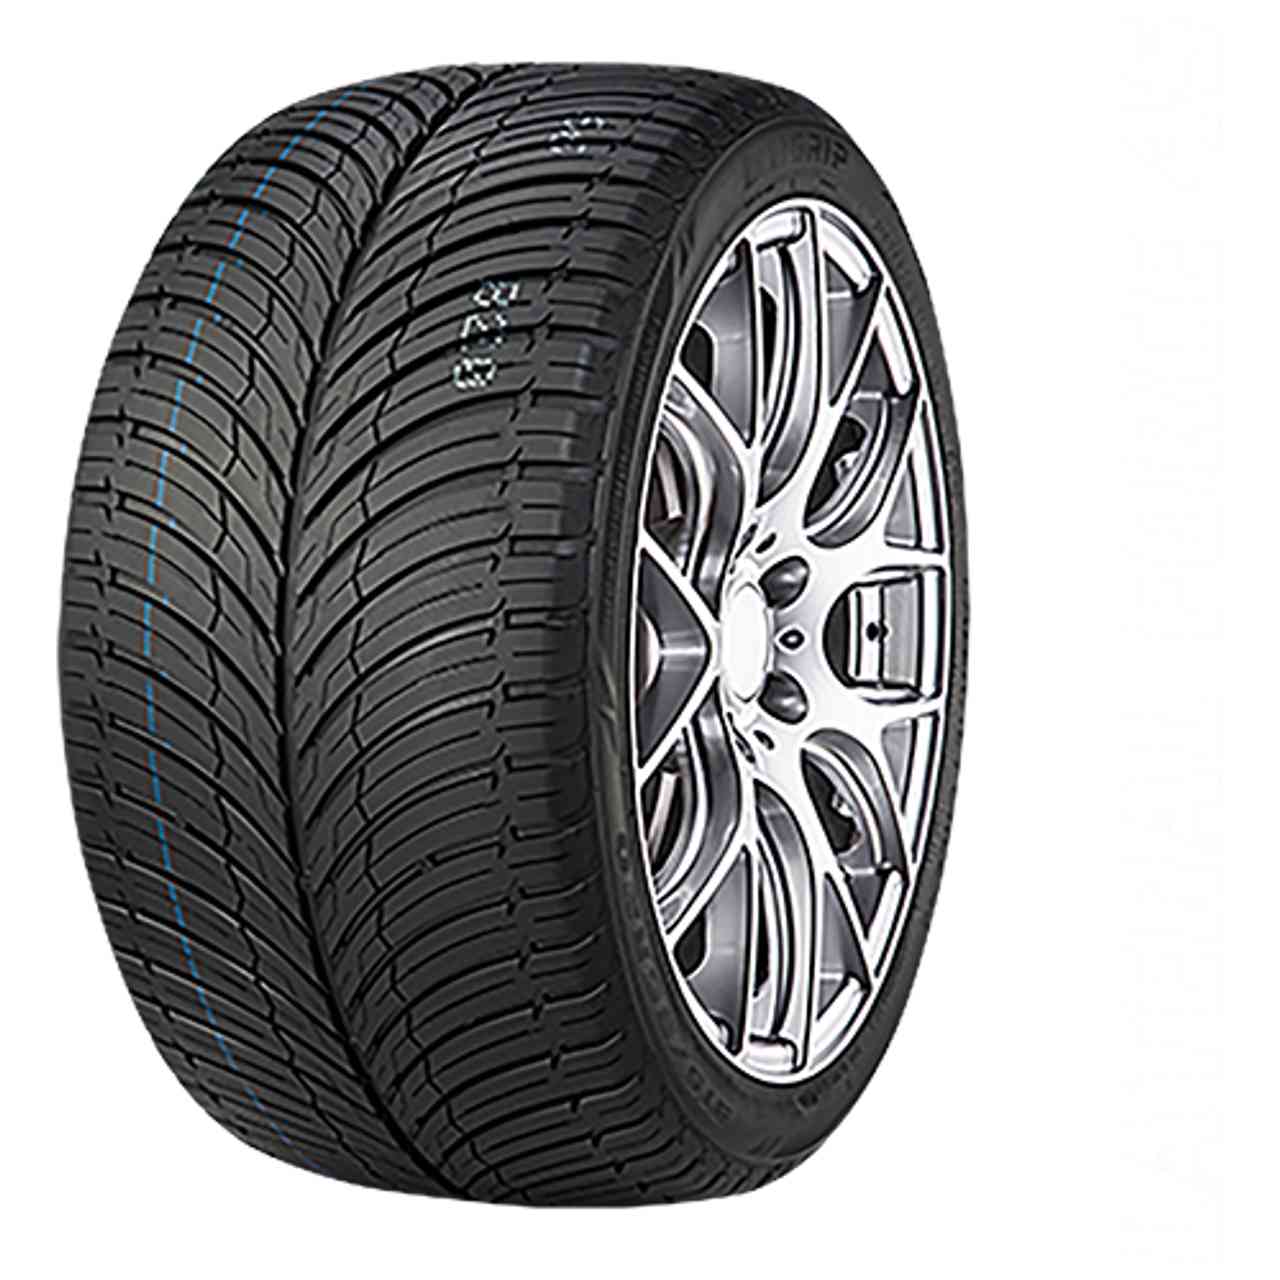 UNIGRIP LATERAL FORCE 4S 255/45ZR20 105W BSW